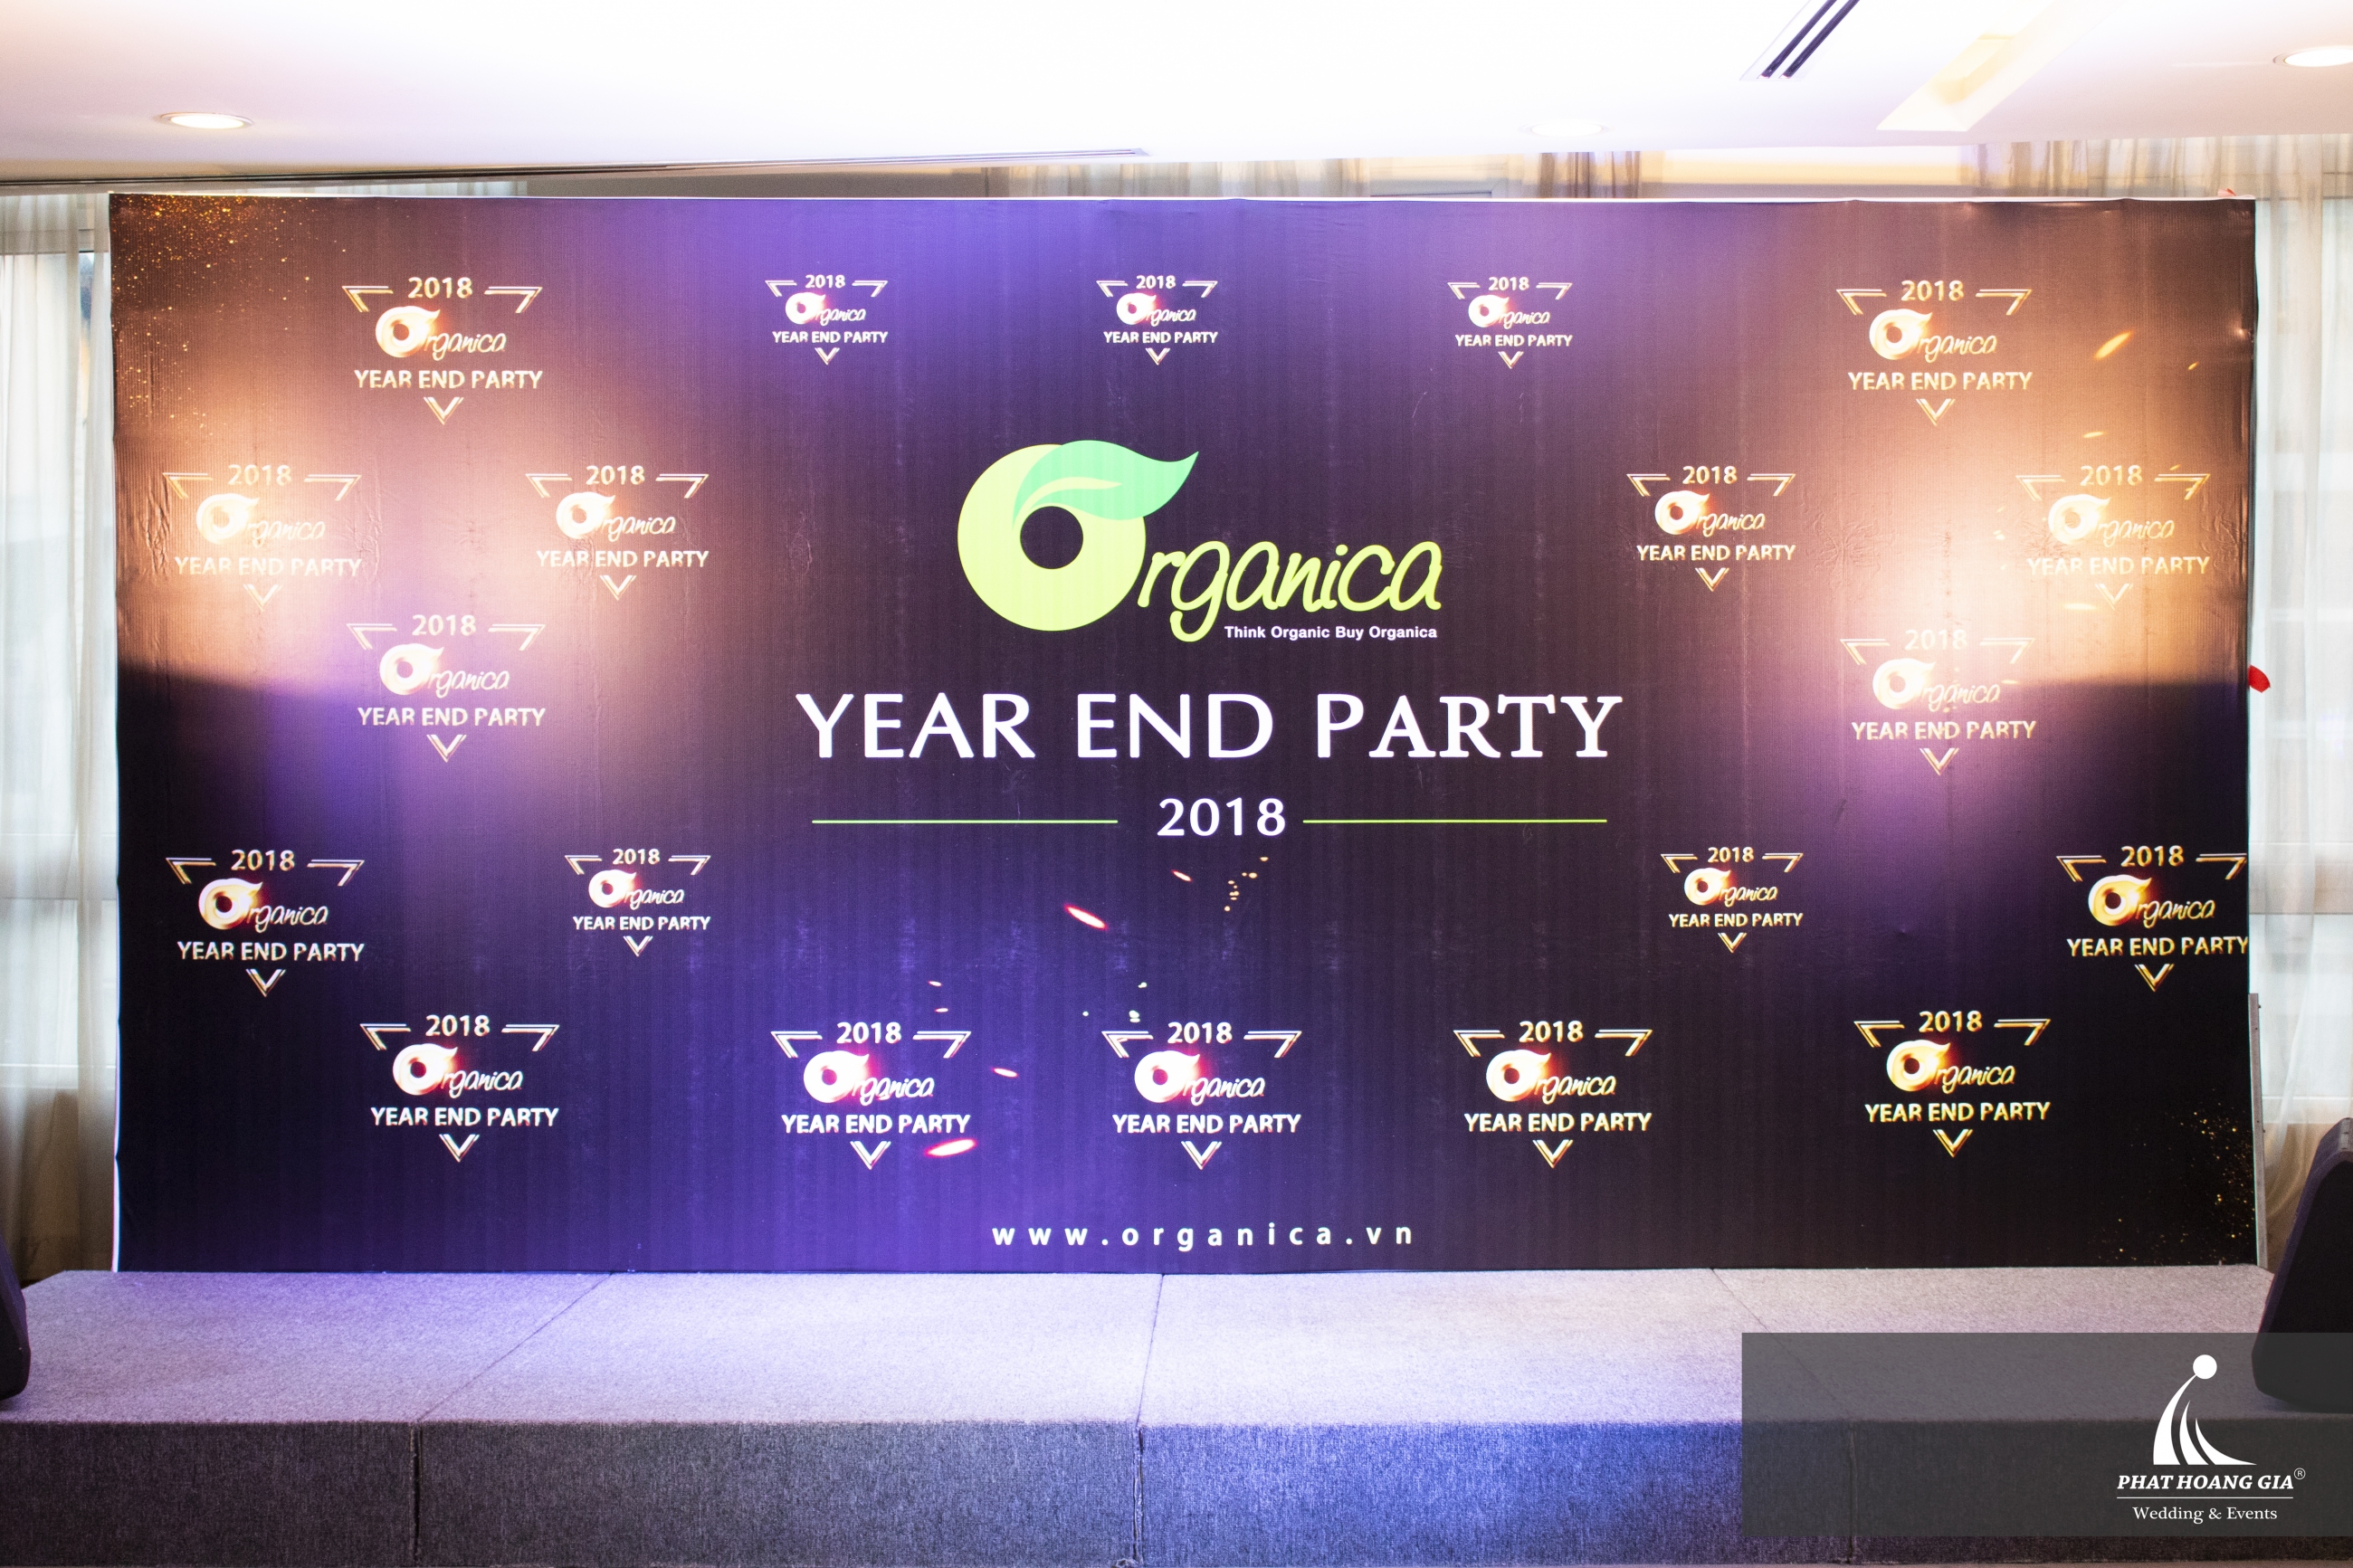 Organica Year End Party 2019